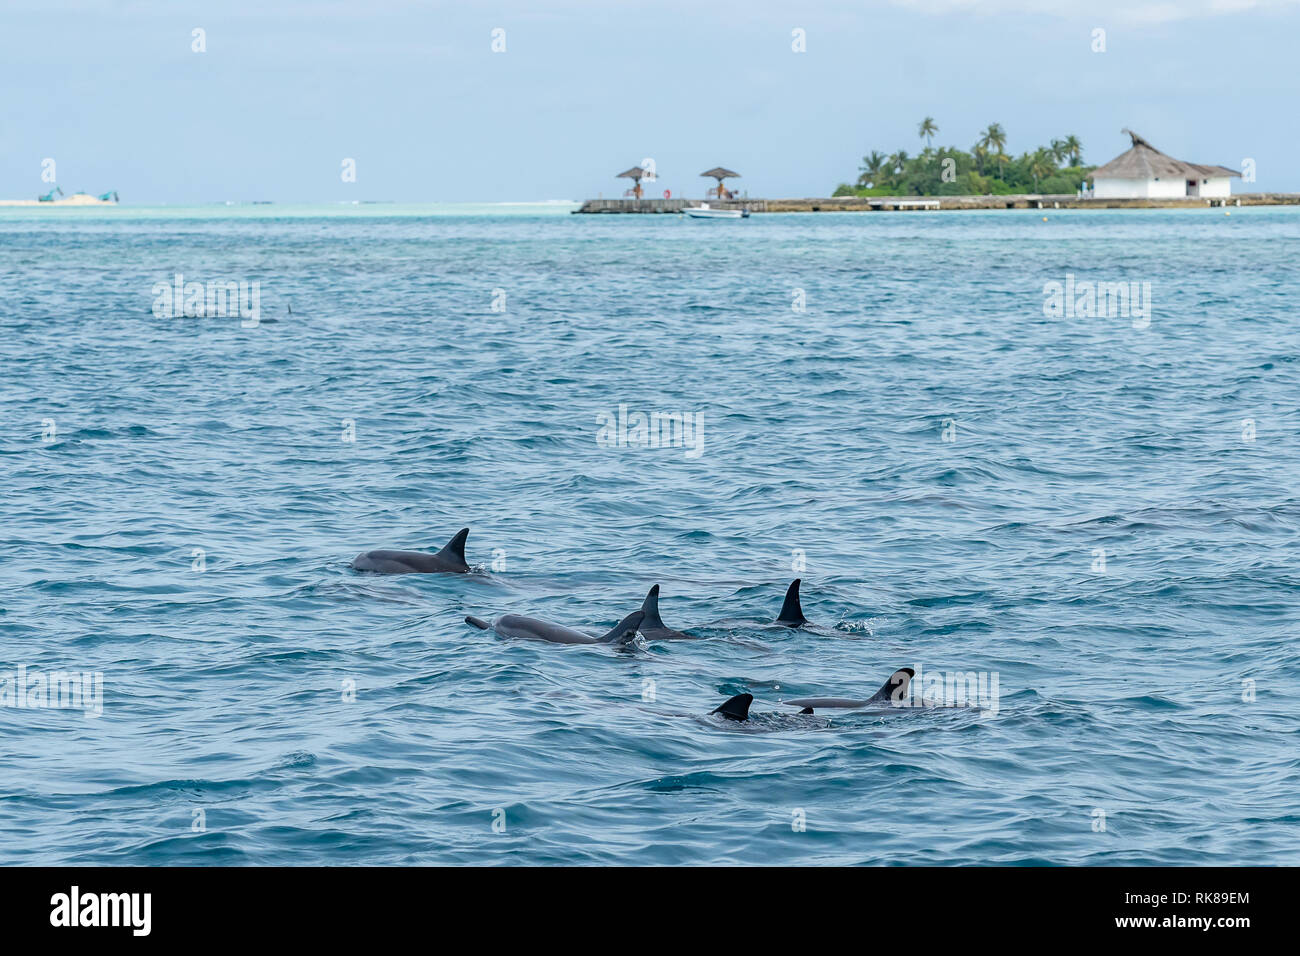 Wild dolphins swimming at the surface of the ocean with the island in background in Maldives. Stock Photo